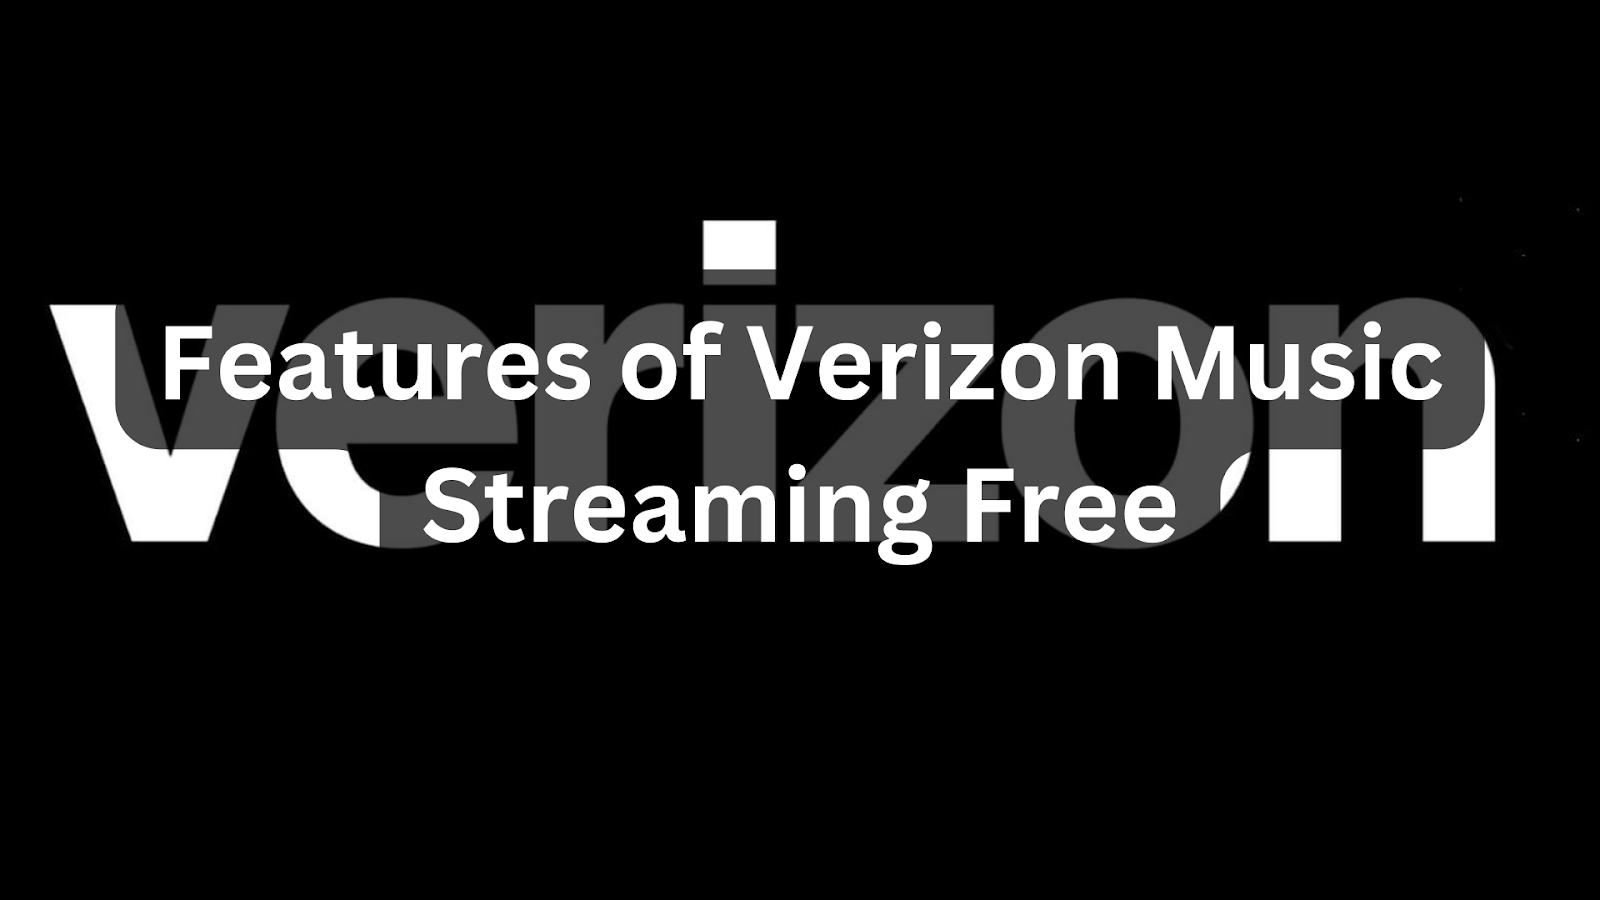 Features of Verizon Music Streaming Free